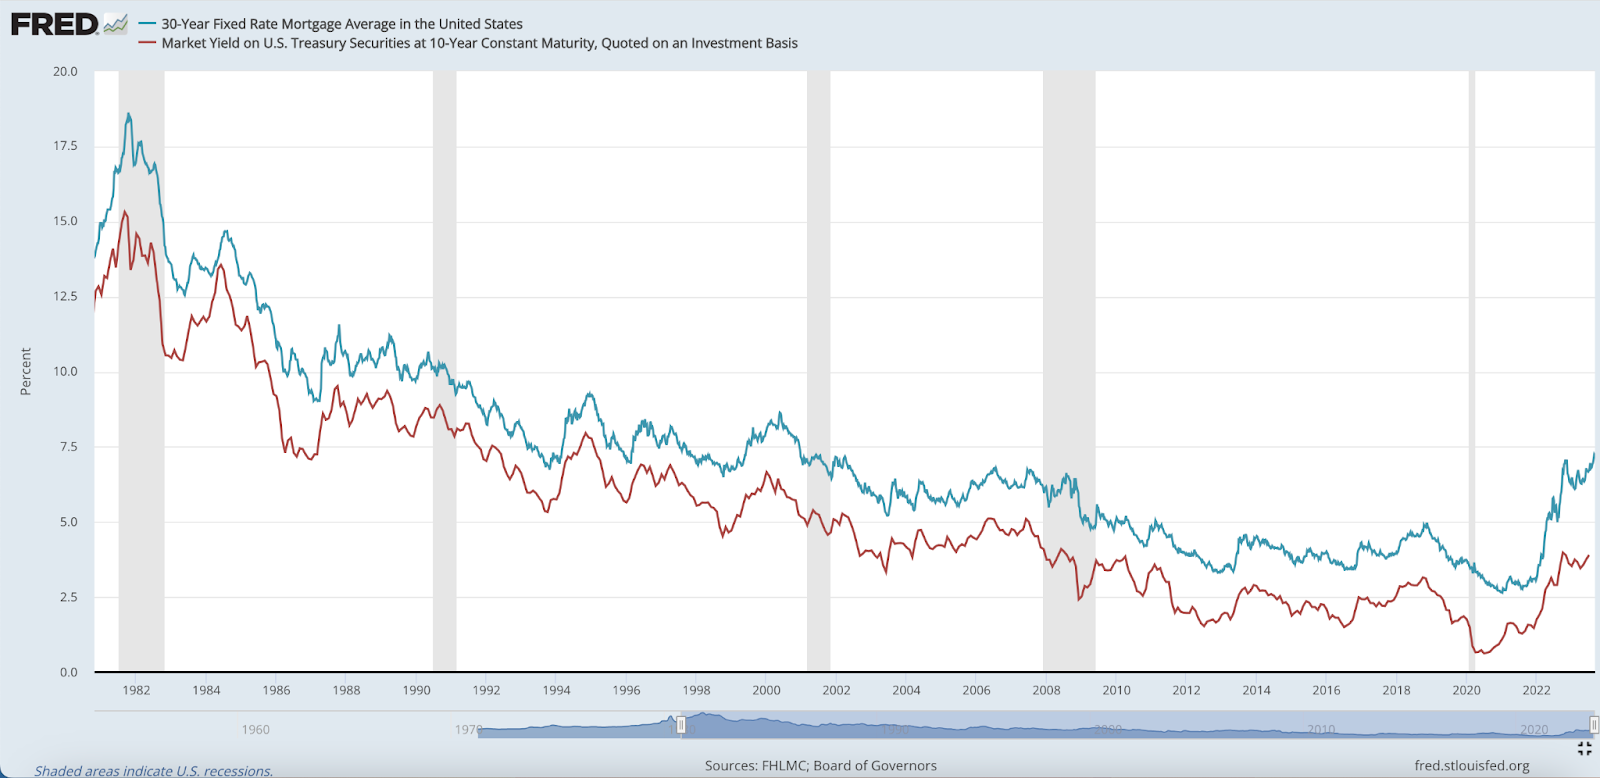 Mortgage Interest Rates and the Impact of Inflation